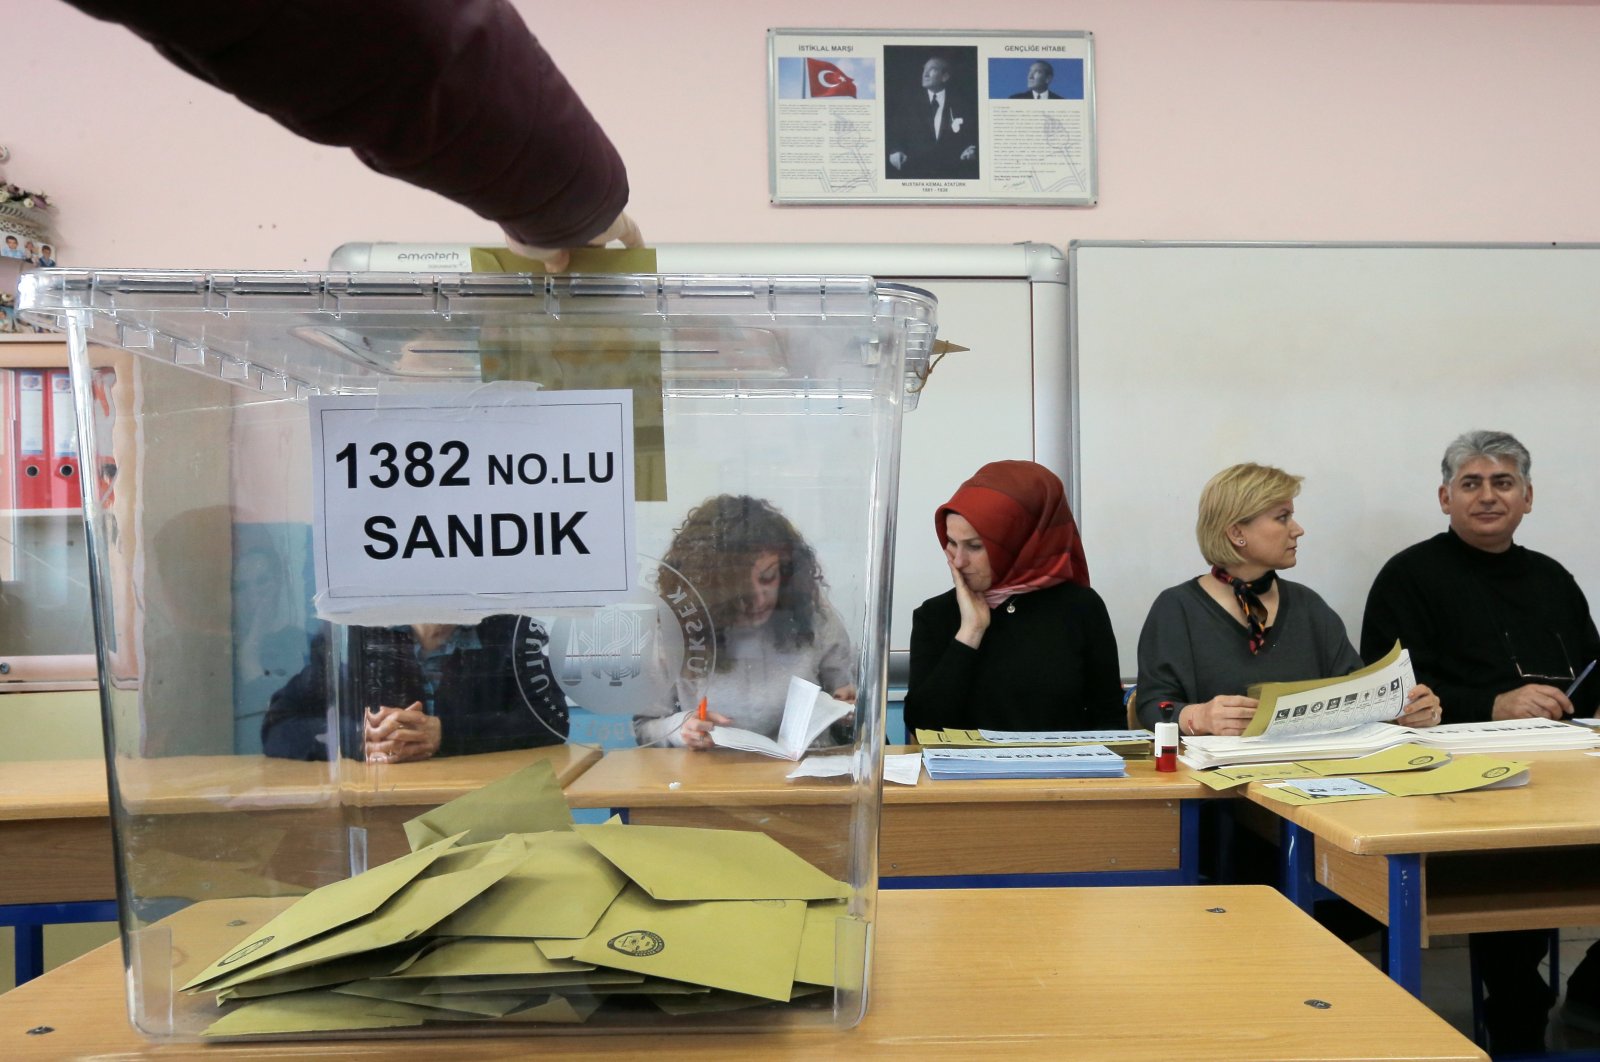 A voter casts a ballot at a polling station during the municipal elections in Istanbul, Turkey, March 31, 2019. (Reuters Photo)